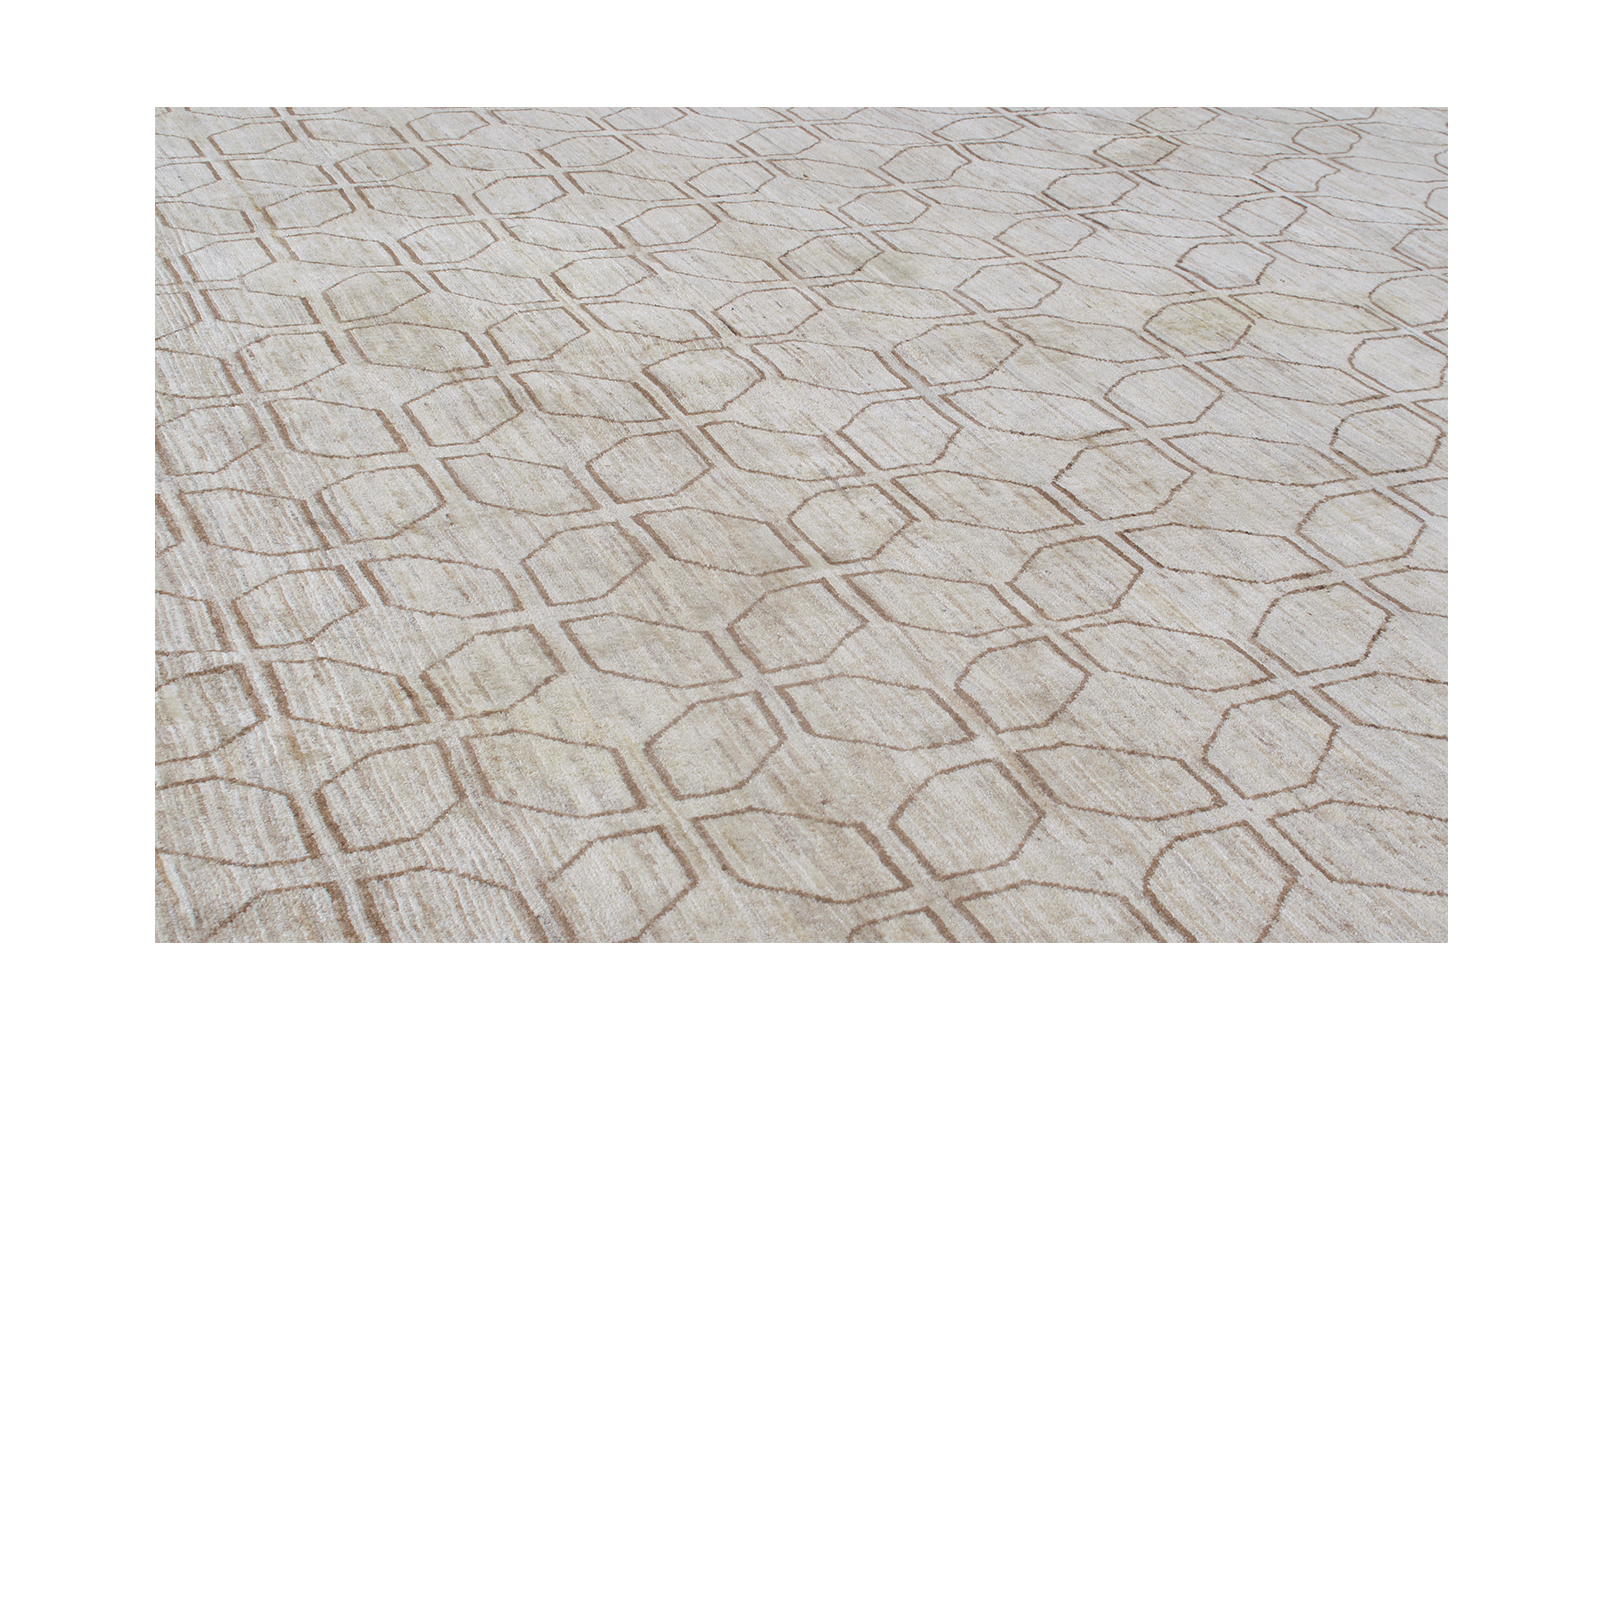 This Shiraz modern rug has Geometric Brown and ivory pattern rug hand-knotted, and made from the finest hand-spun, hand-carded undyed wool